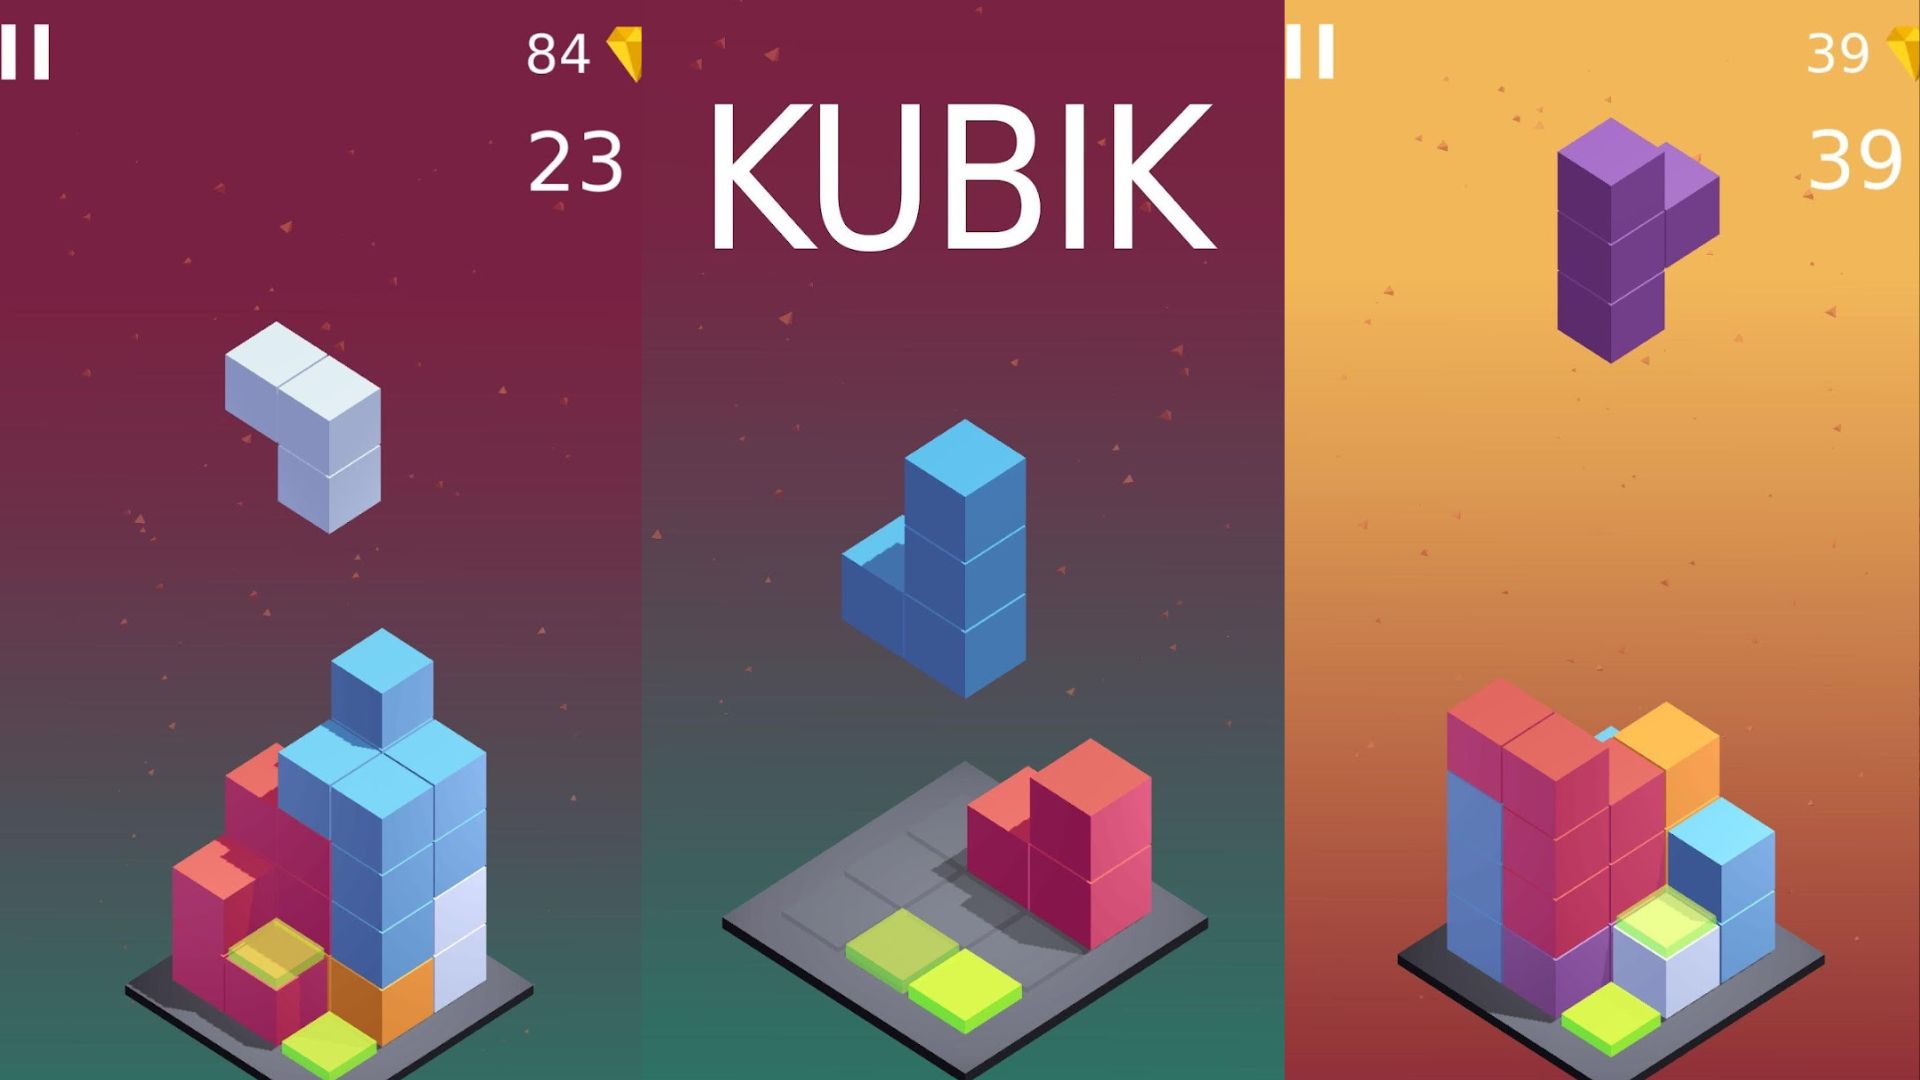 One of the many Tetris games, Kubik, a 3D version of Tetris. Three screens are shown in the image, each showing a 3D tower being built out of Tetris blocks. The logo for Kubik is in the middle of the middle screen.